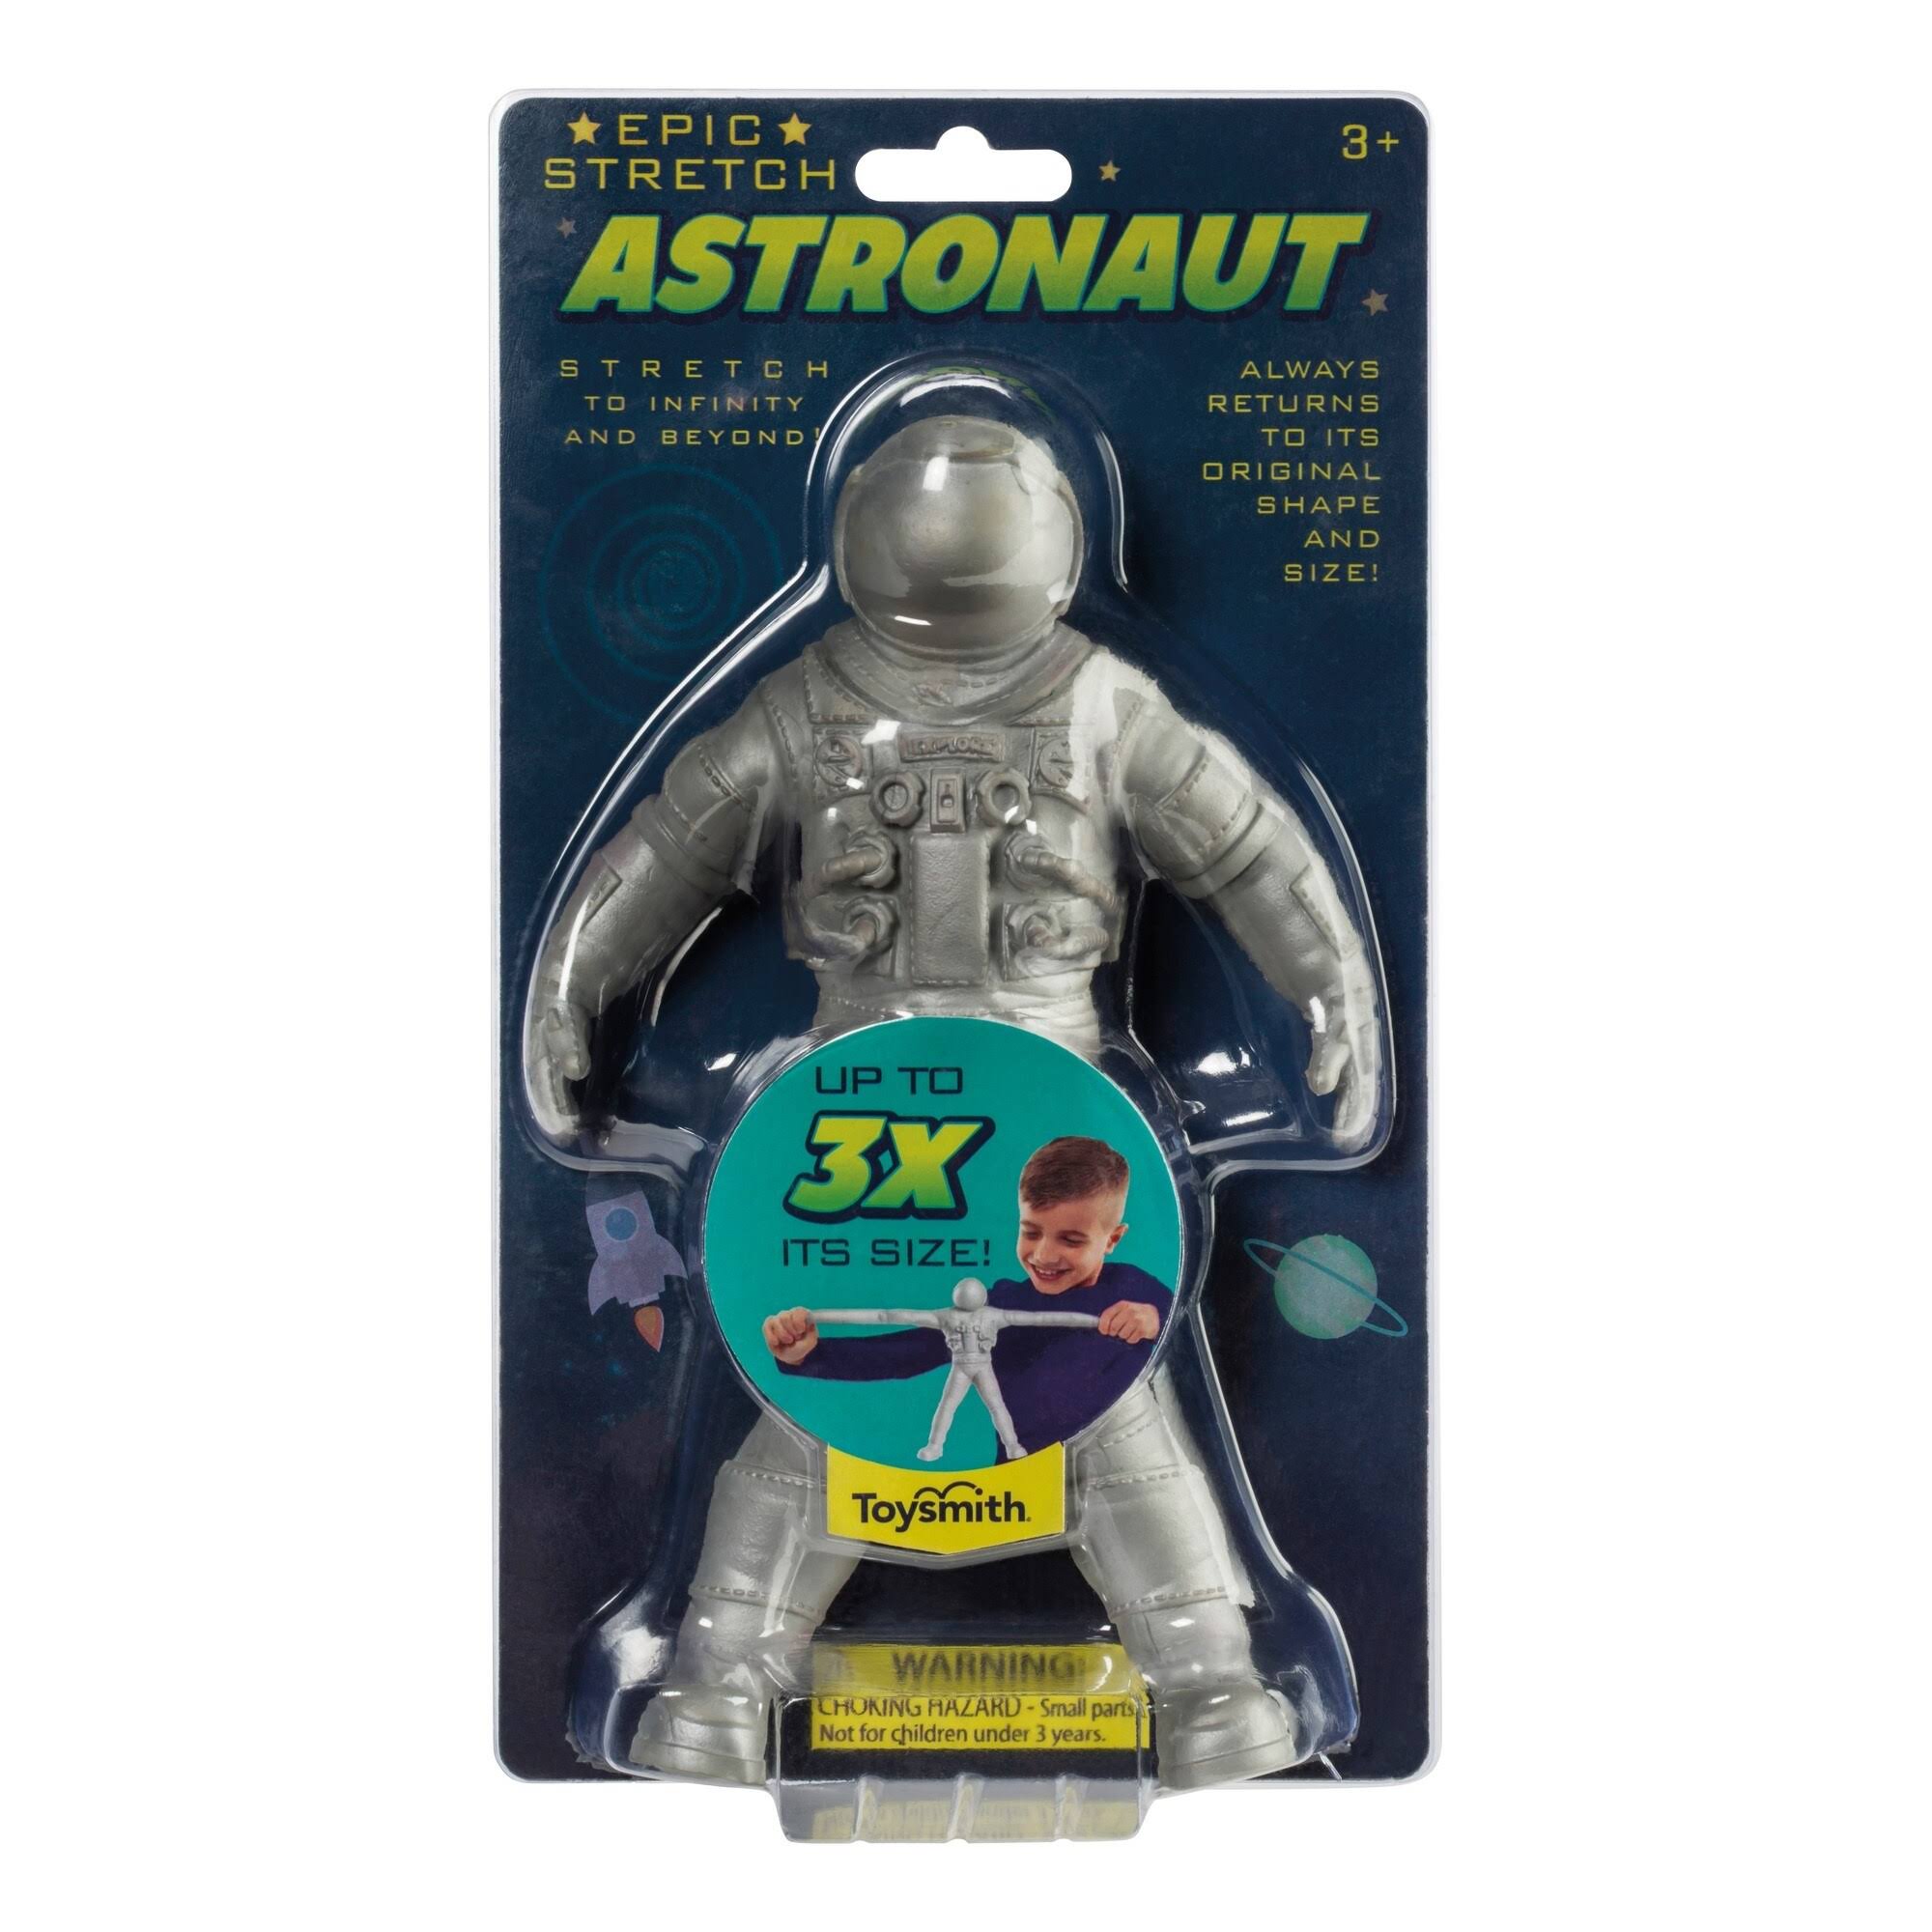 Toysmith Epic Stretch Astronaut, Stretches Up To 24 Inches - for Boys